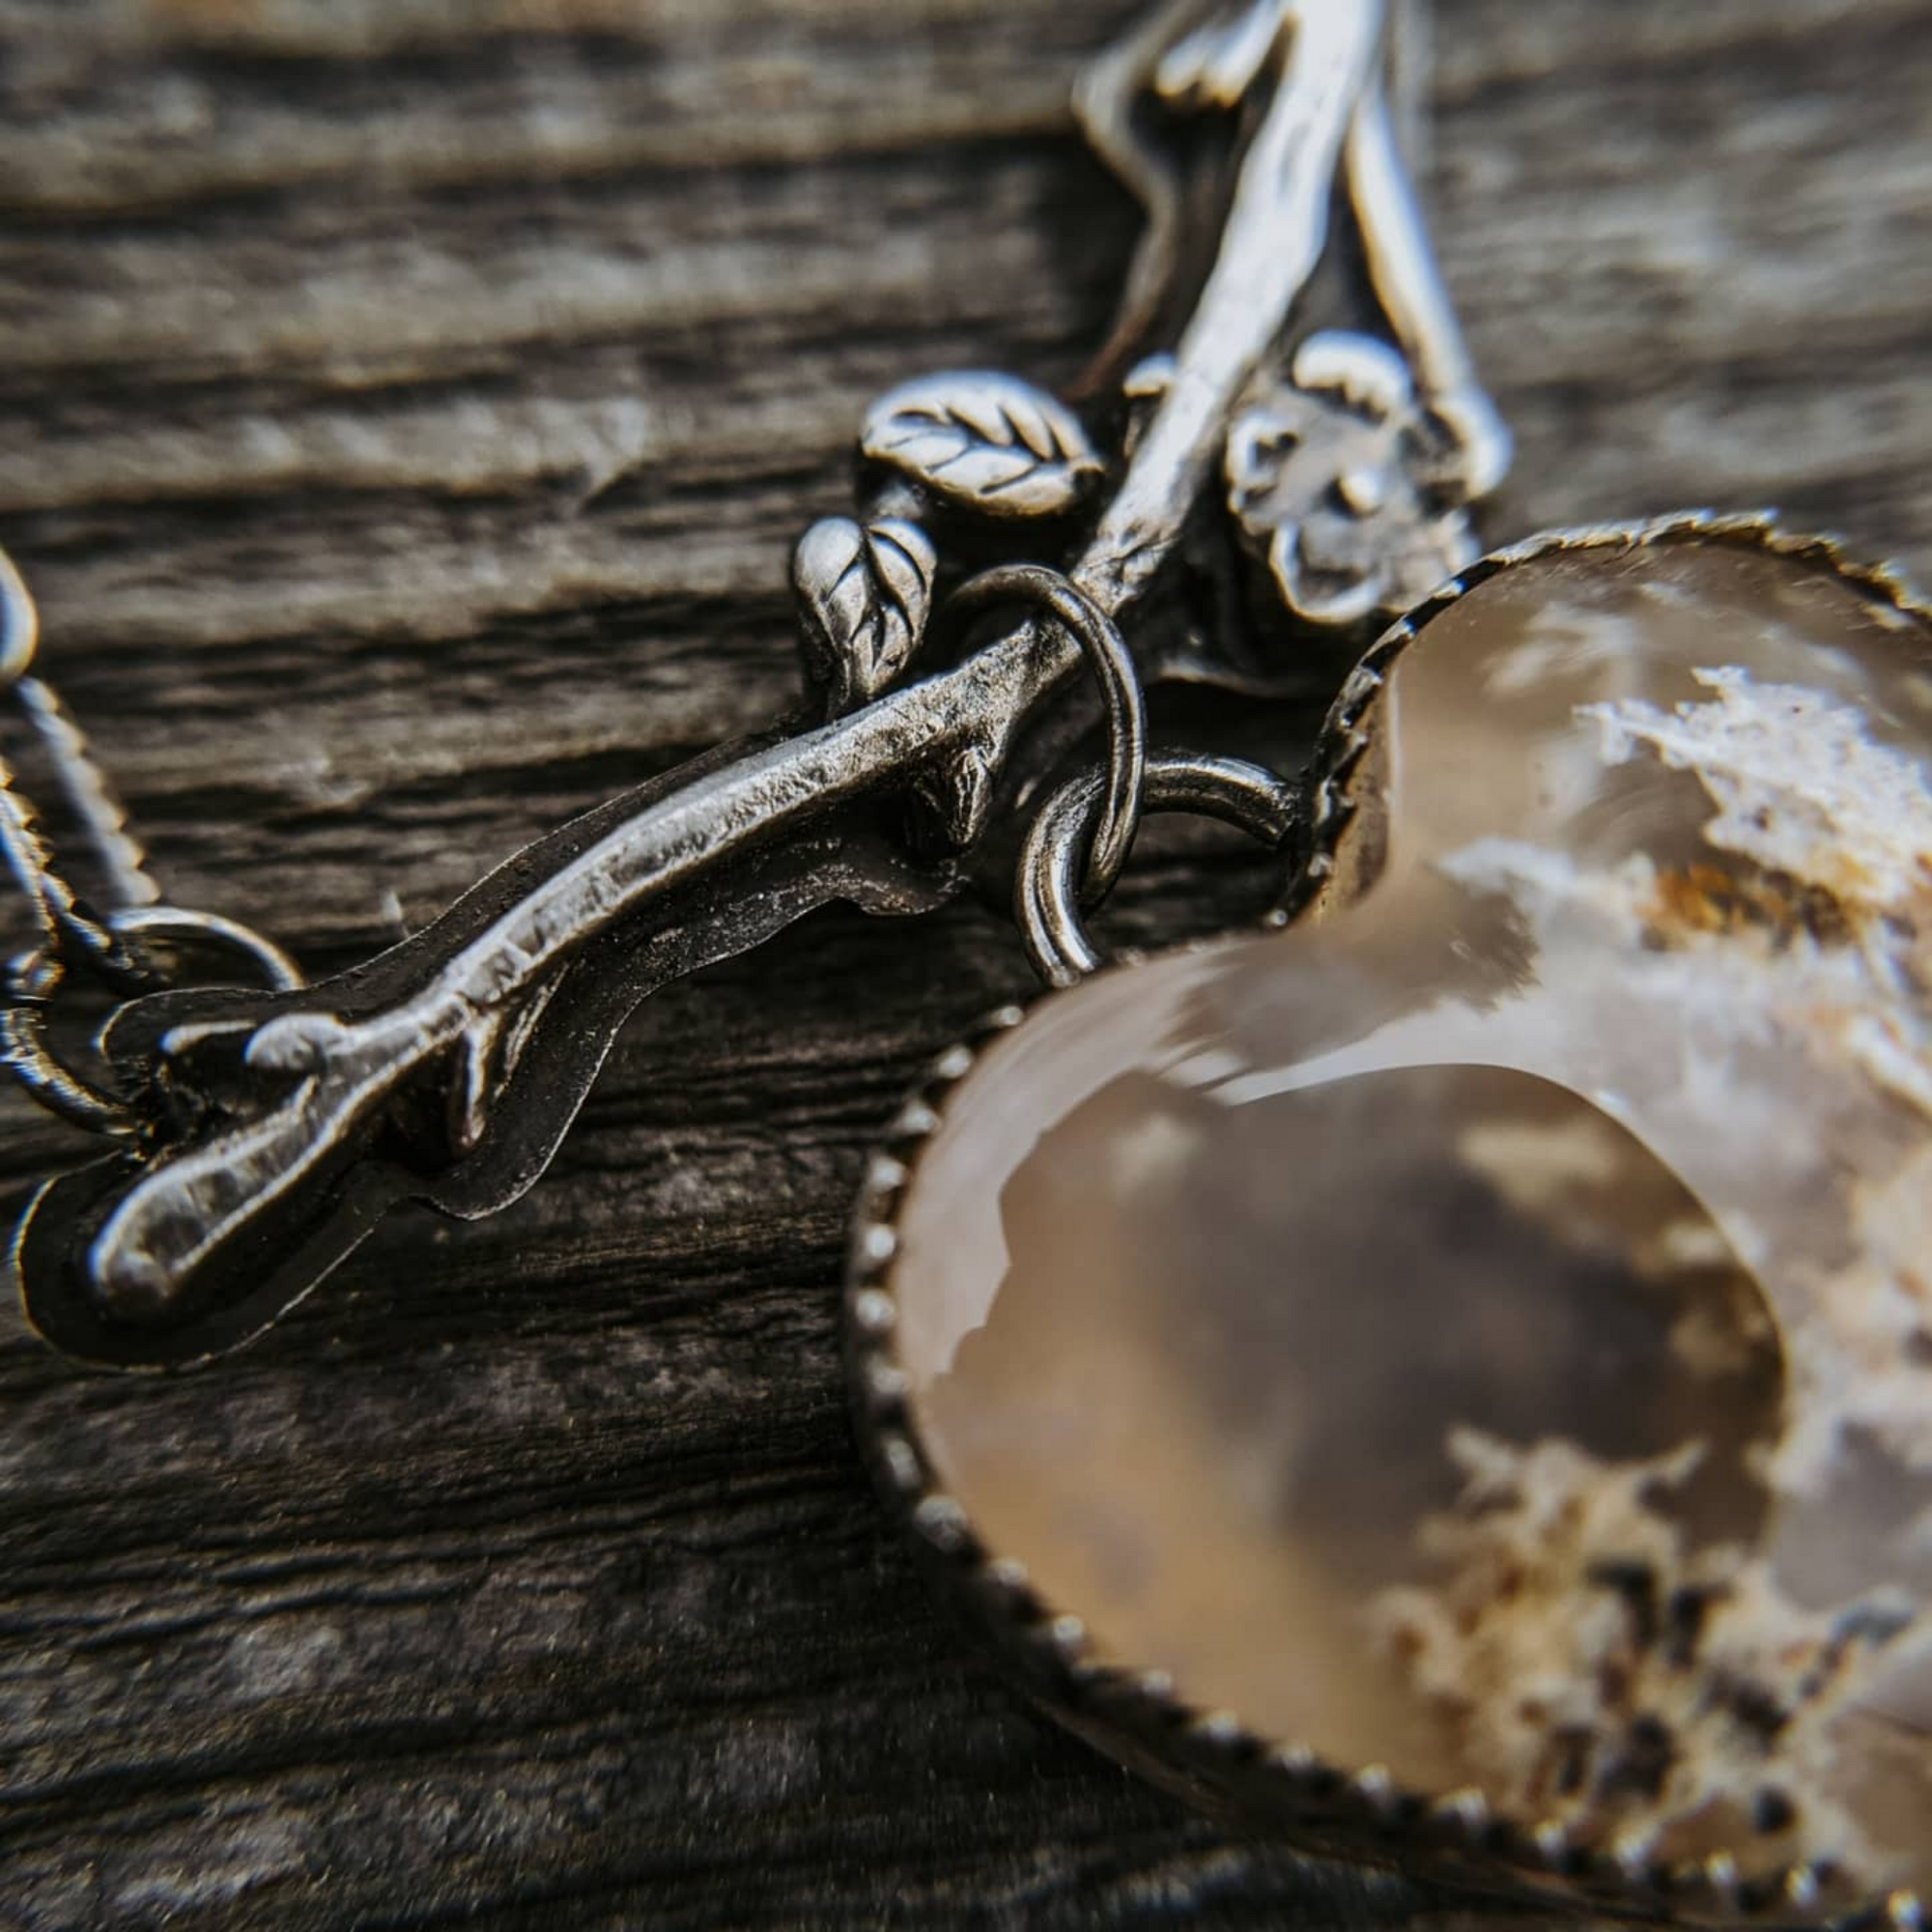 Moss Agate heart stone hanging from a sterling silver branch necklace